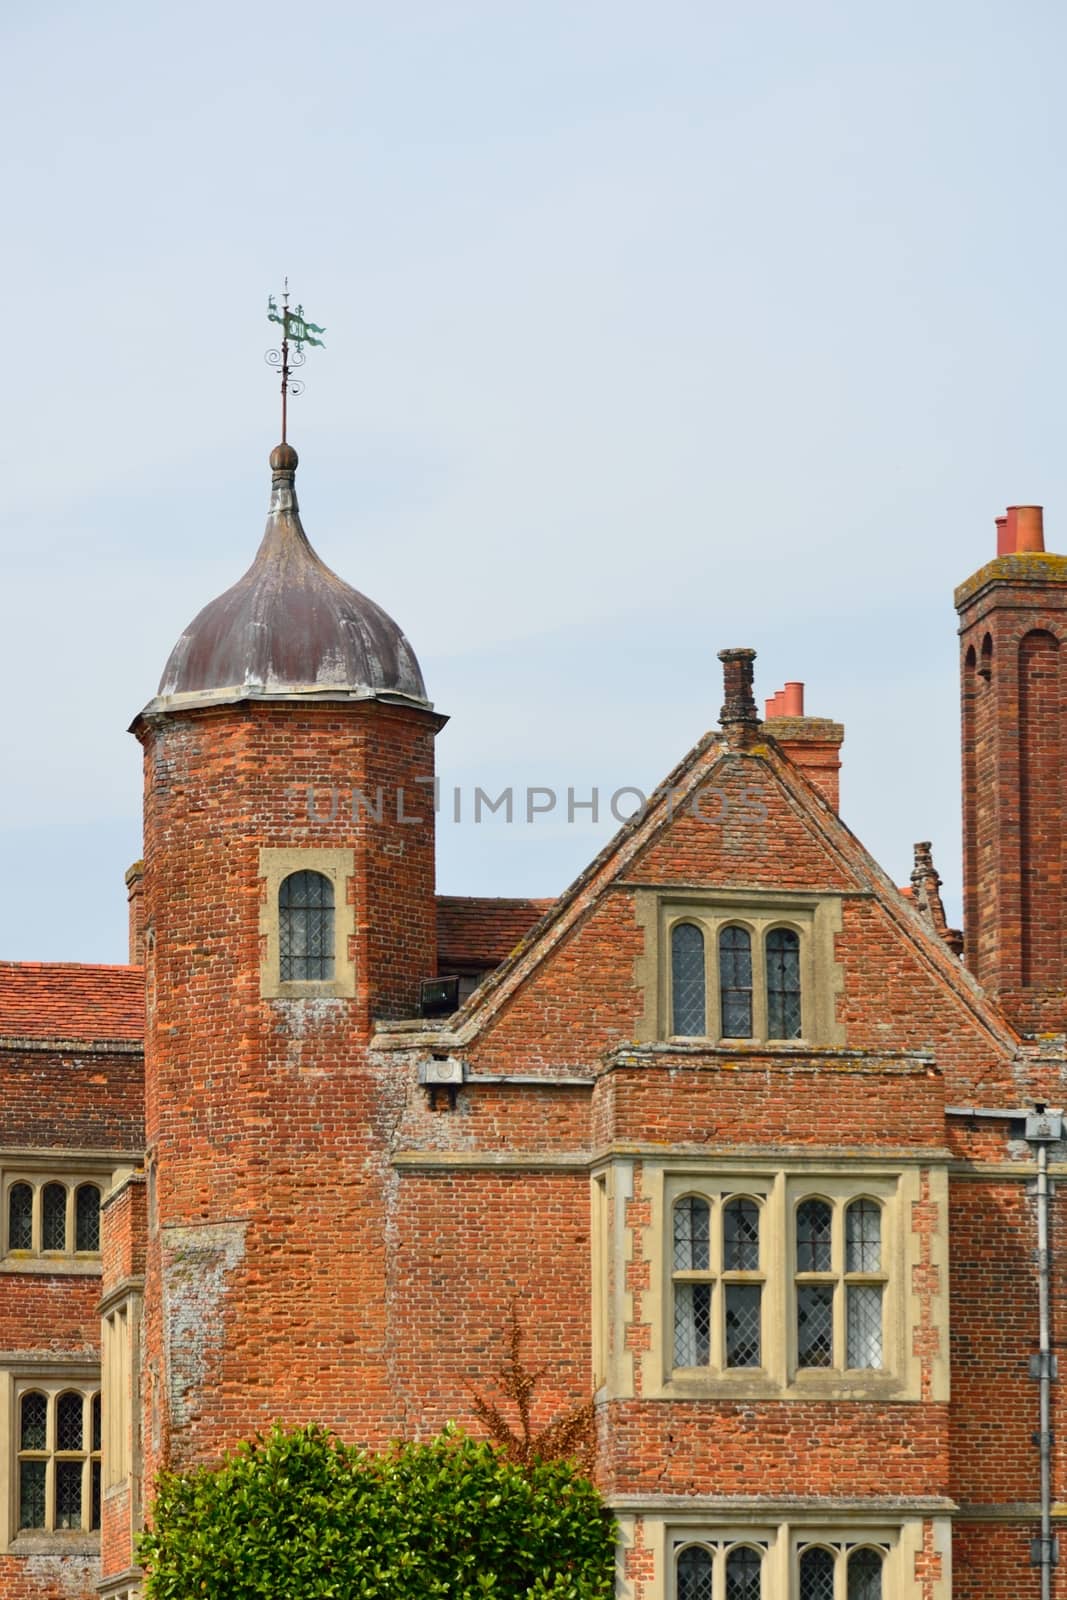 Tudor Brick Building with tower by pauws99